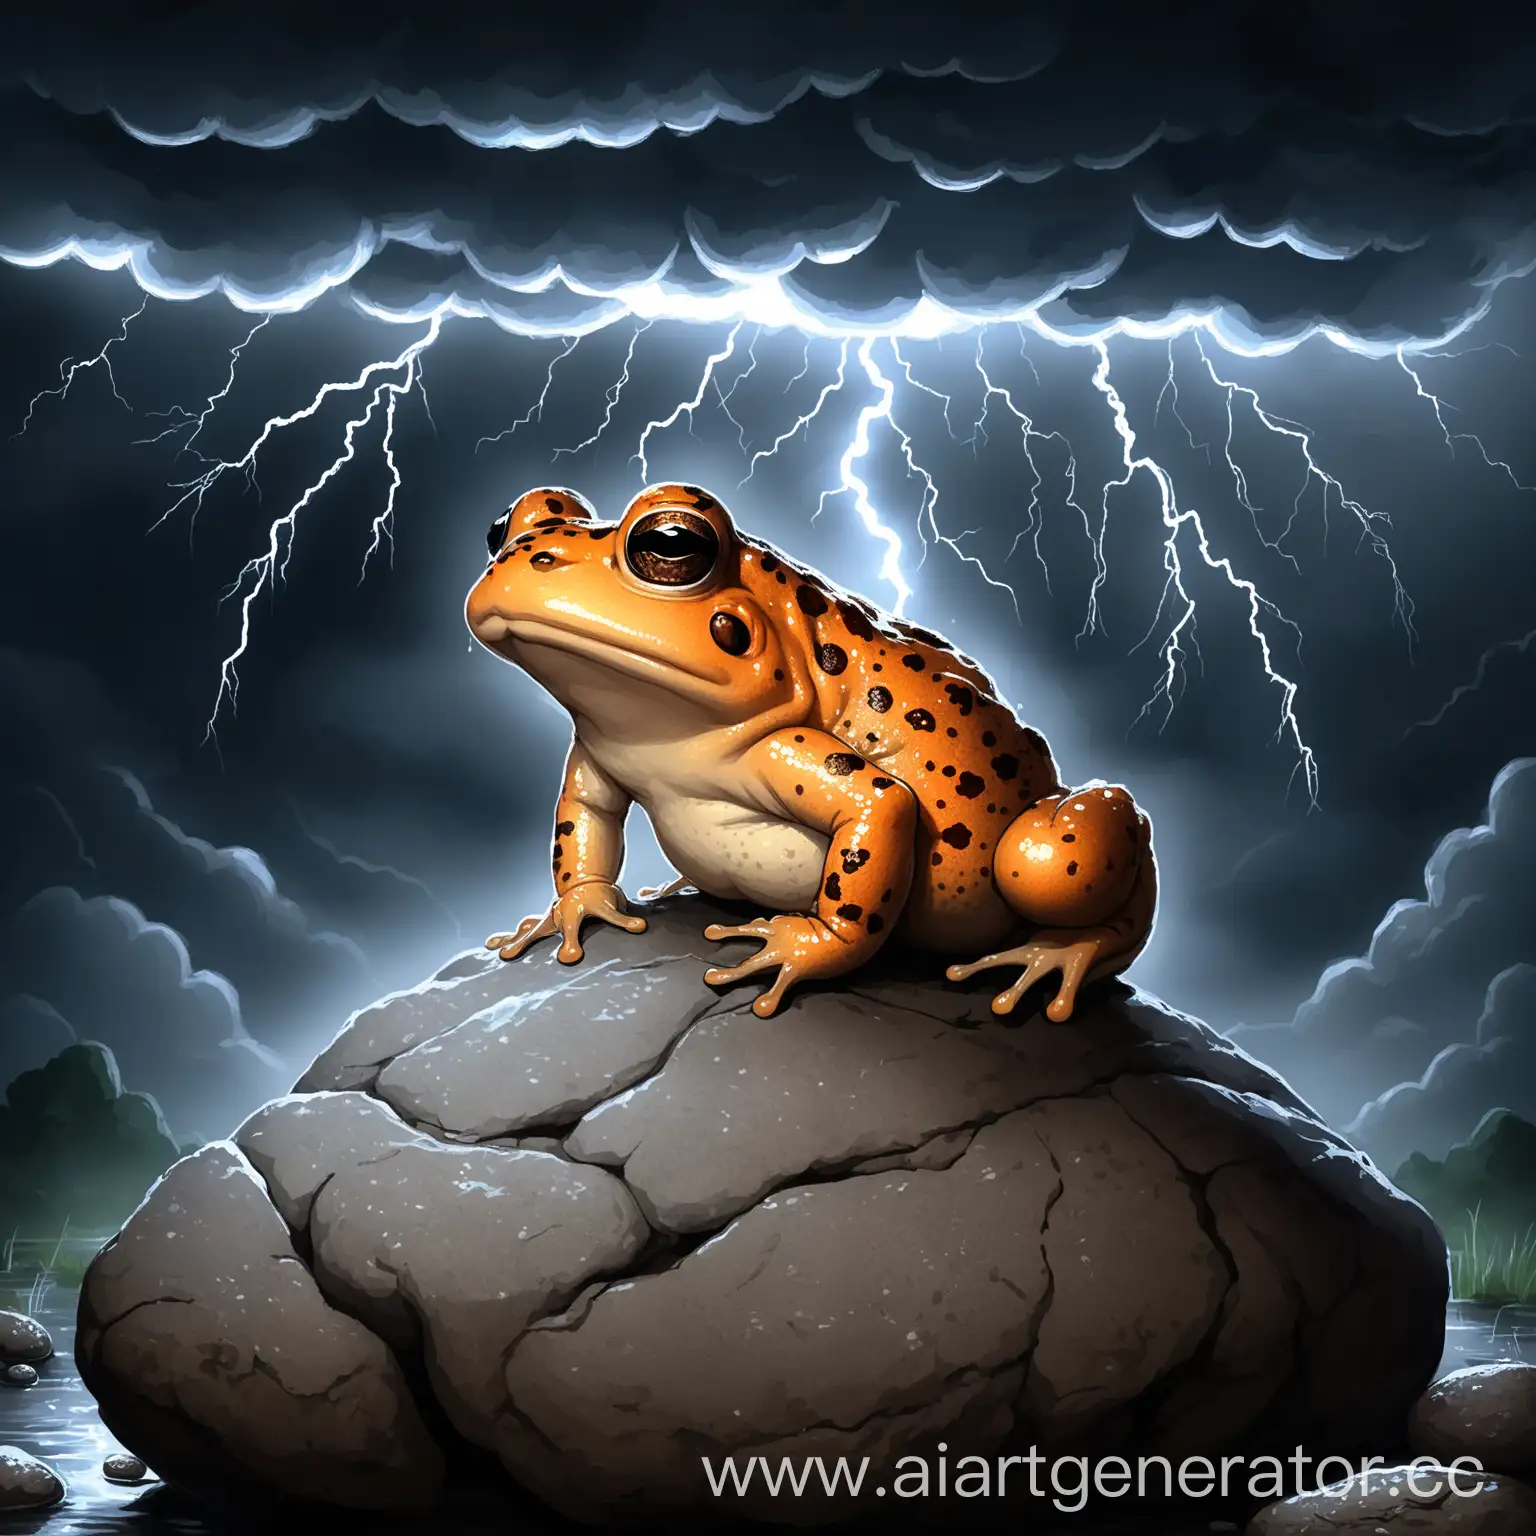 Mystical-Toad-Sitting-on-Stone-Amid-Thunderstorm